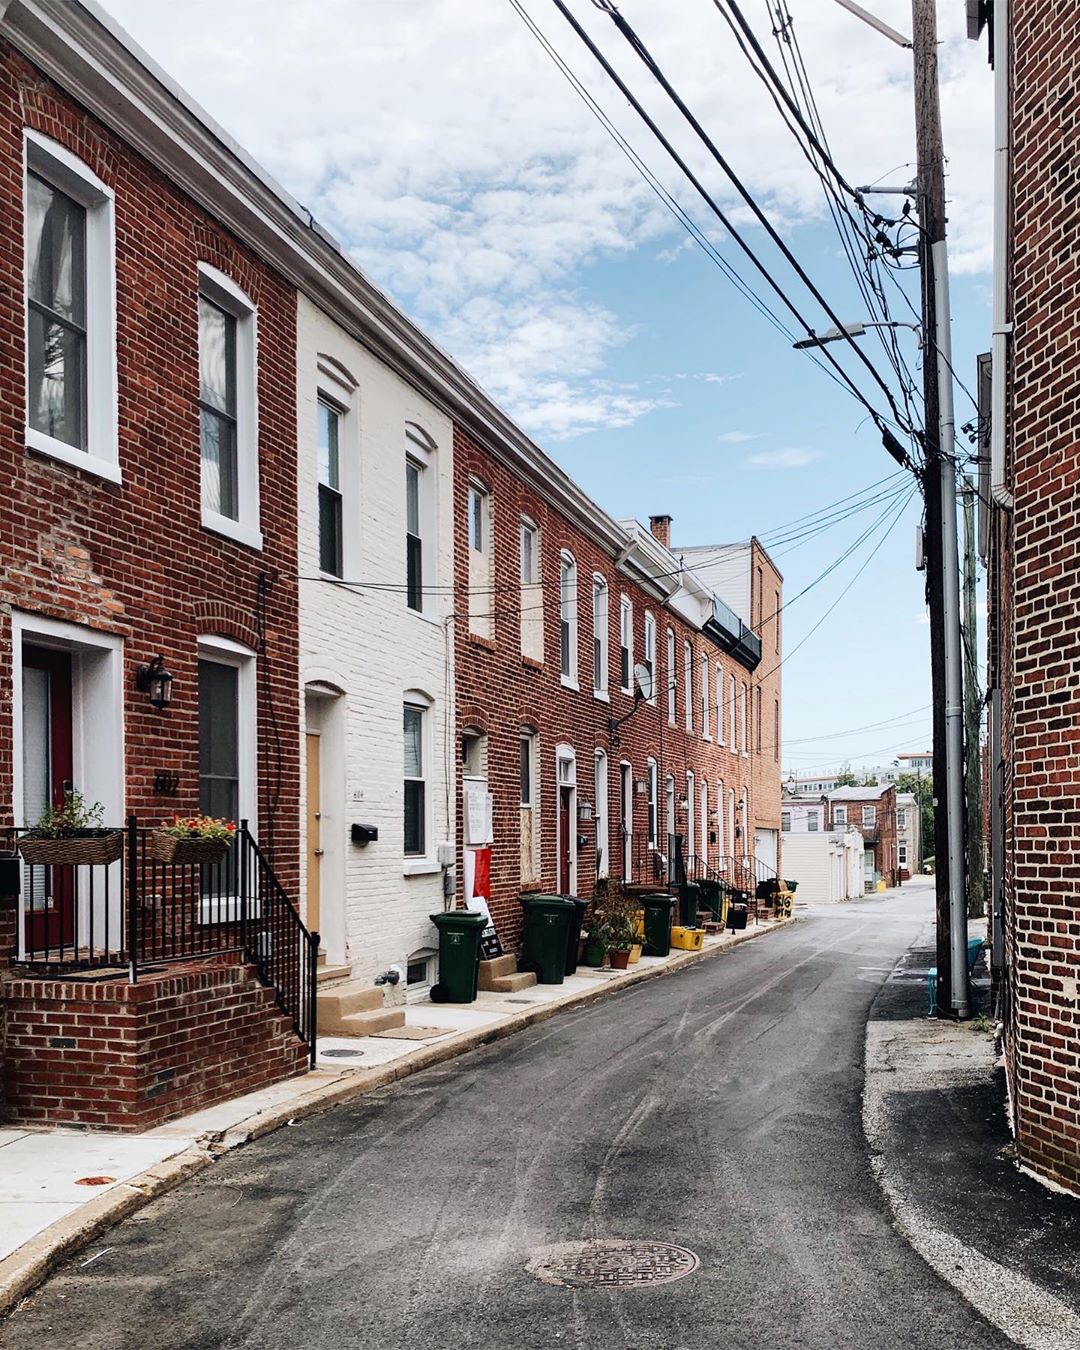 Front of Row Houses in Fells Point, Baltimore. Photo by Instagram user @heartbrkhannah